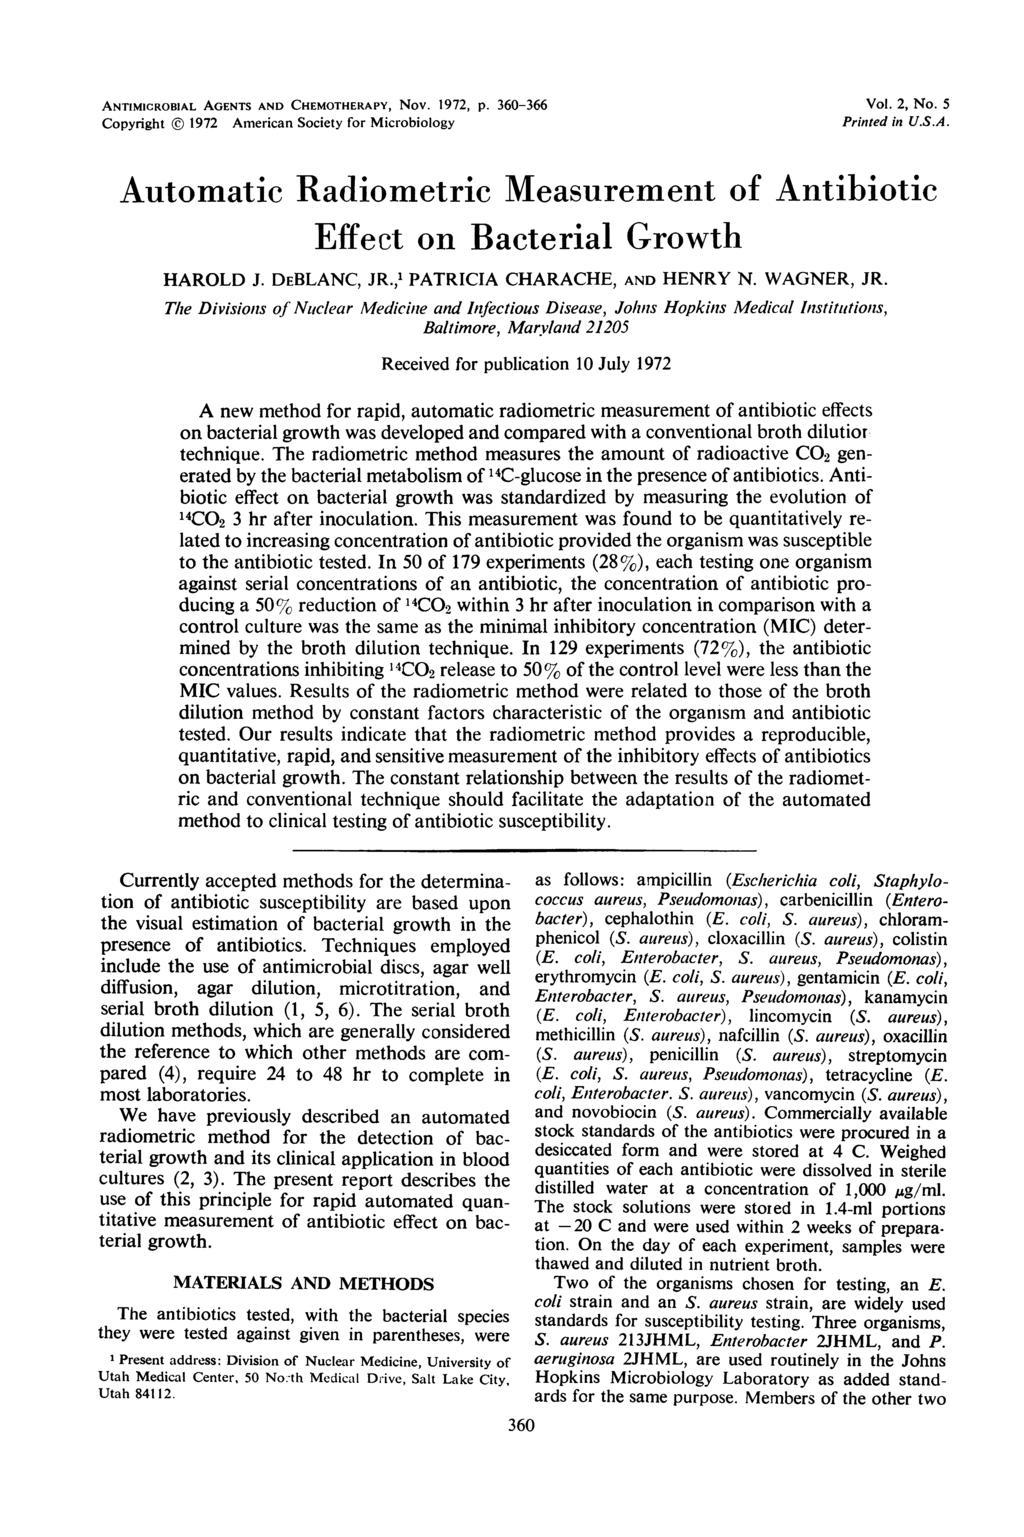 ANTIMICROBIAL AGENTS AND CHEMOTHERAPY, Nov. 17, p. 36-366 Copyright ( 17 American Society for Microbiology Vol., No. 5 Printed in U.S.A. Automatic Radiometric Measurement of Antibiotic Effeet on Bacterial Growth HAROLD J.